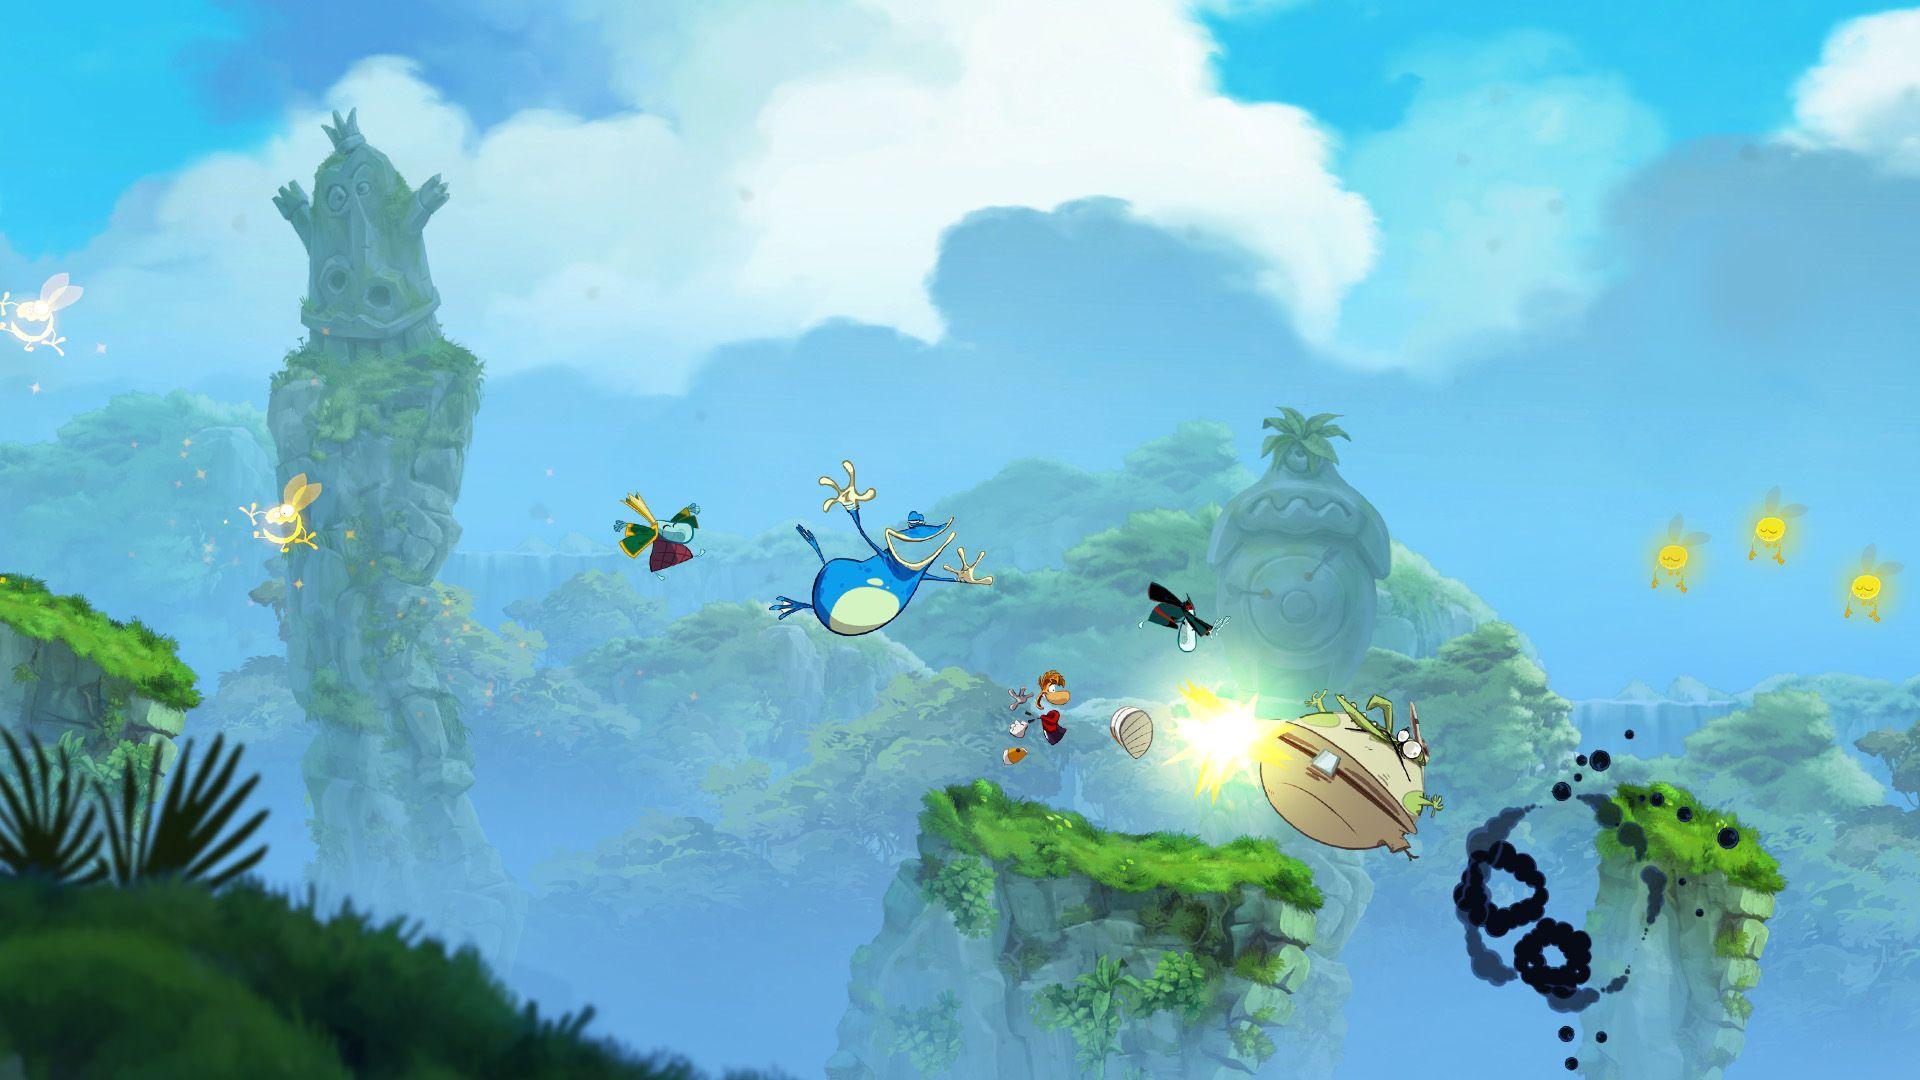 Rayman Origins finally arrives for PC with minimum, recommended